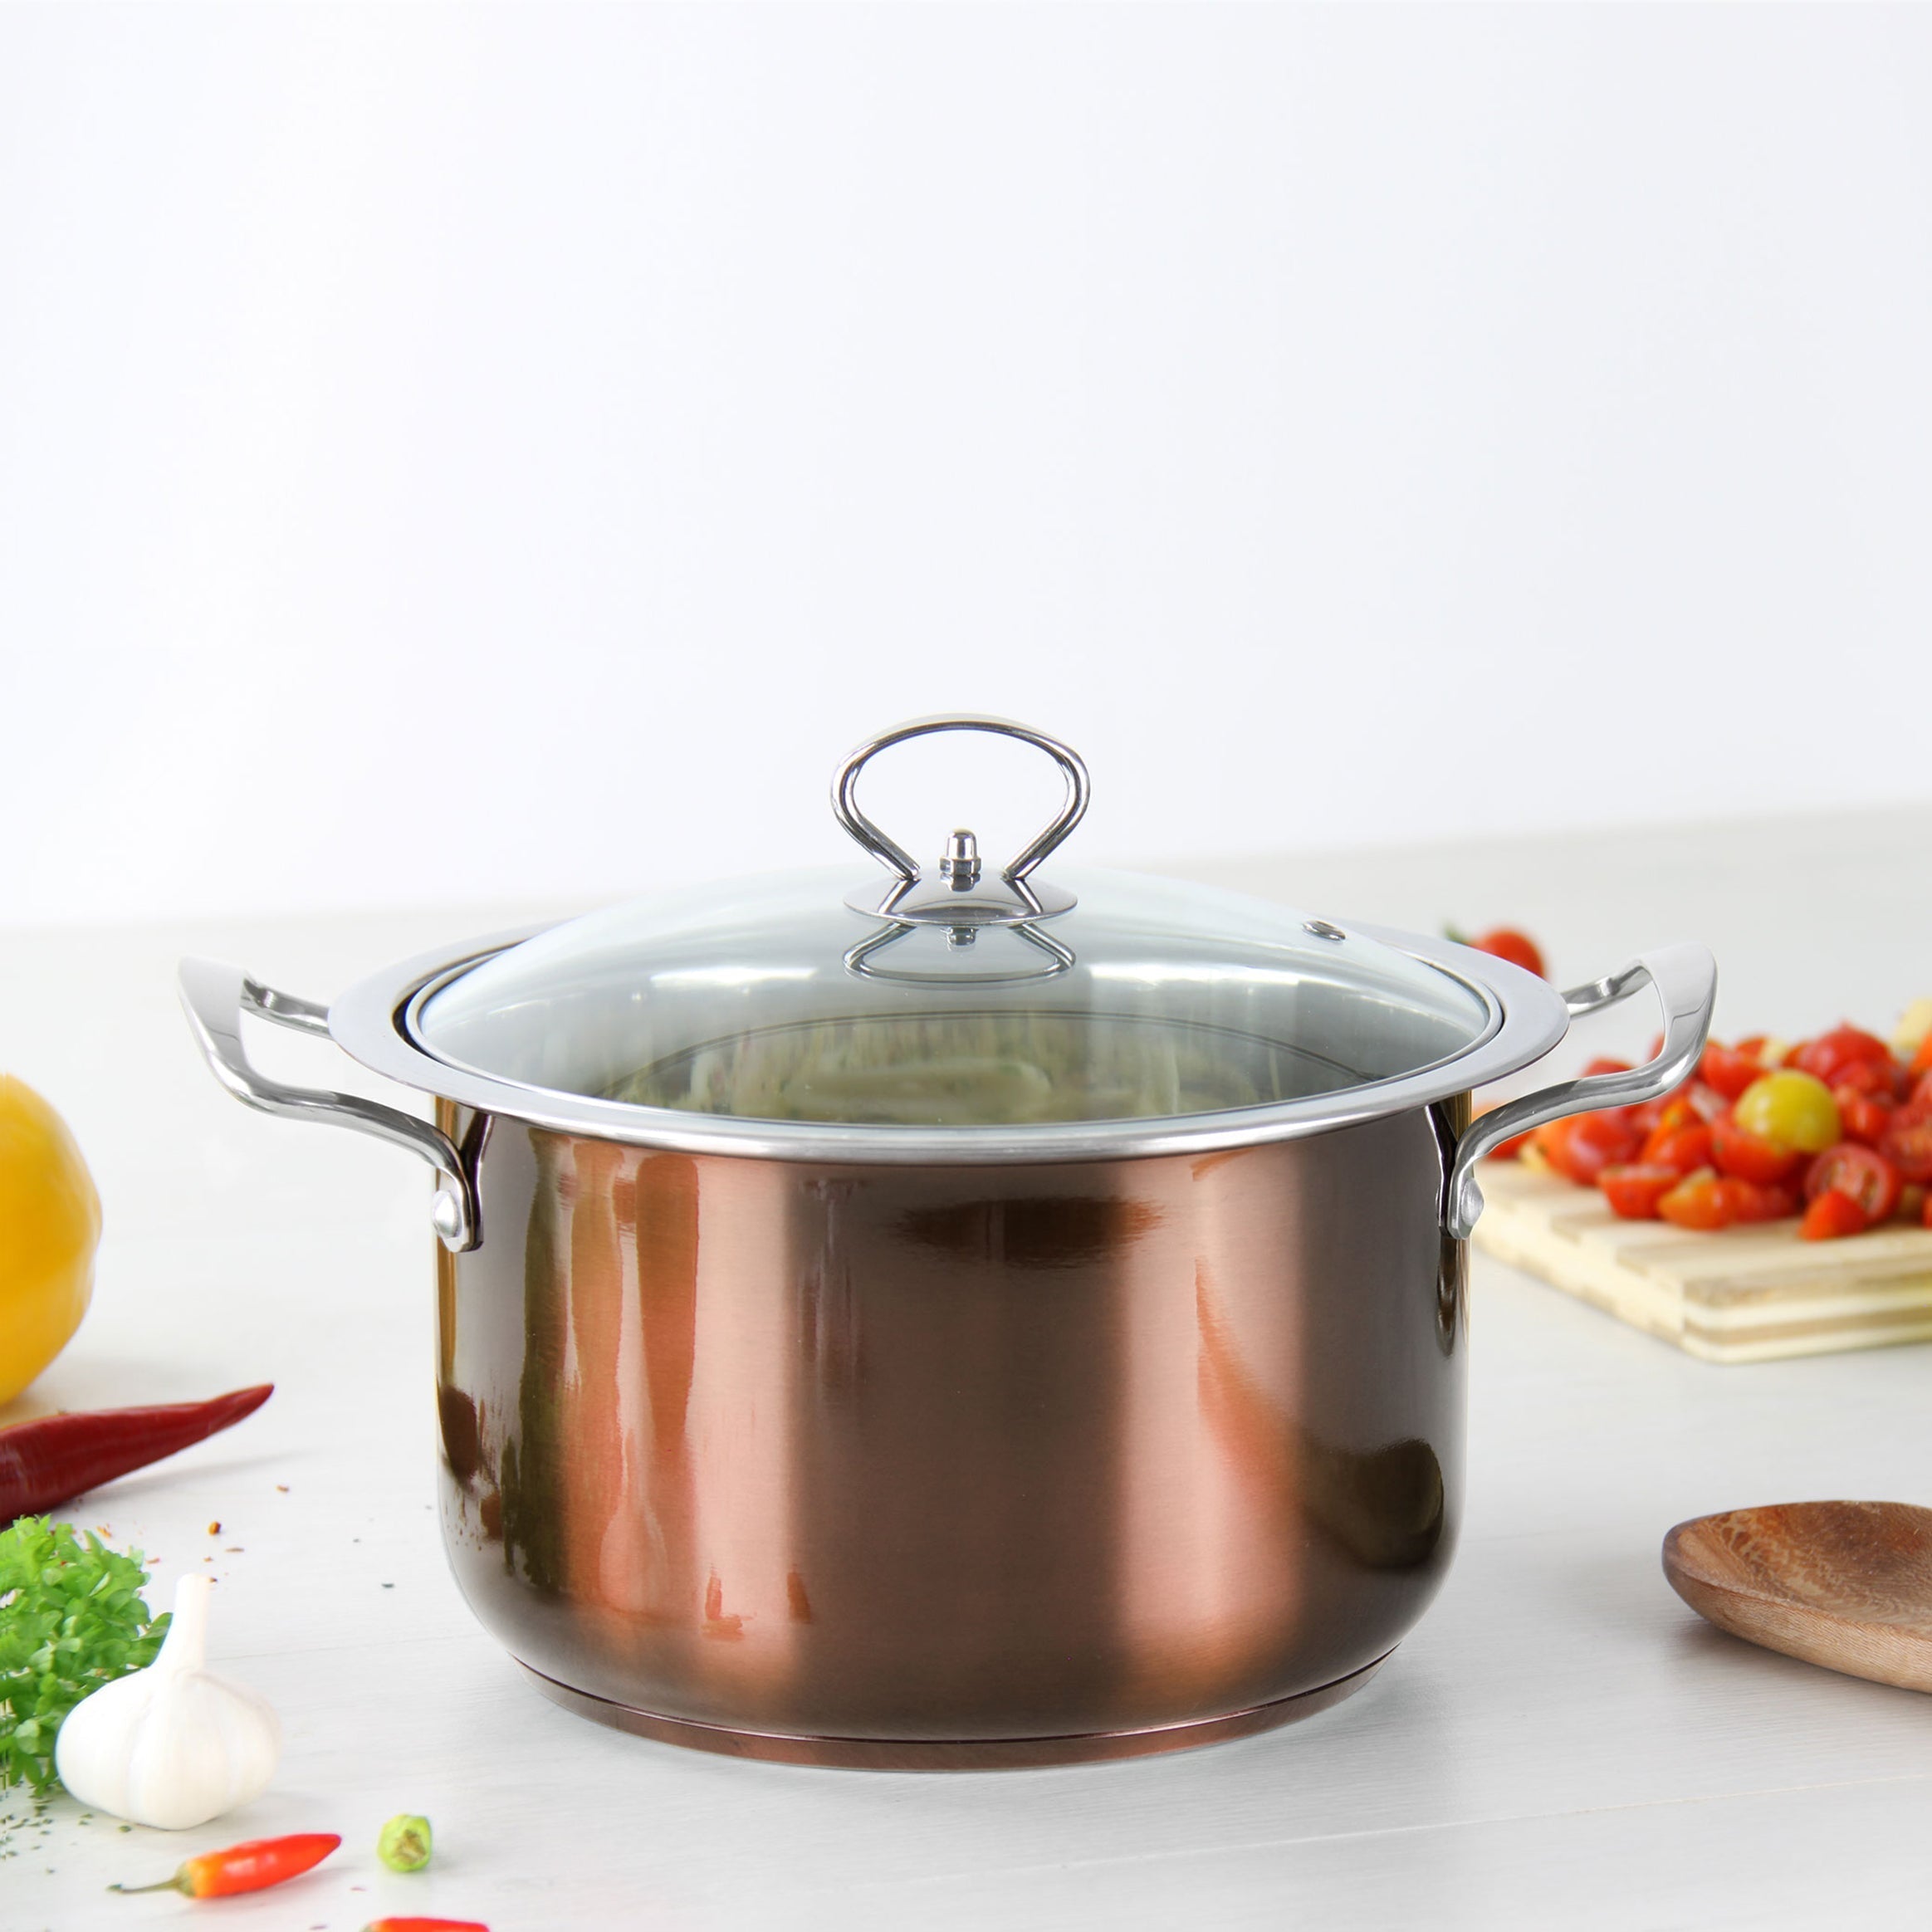 Stainless Steel Stockpot - Induction Base - AXINITE - 30cm